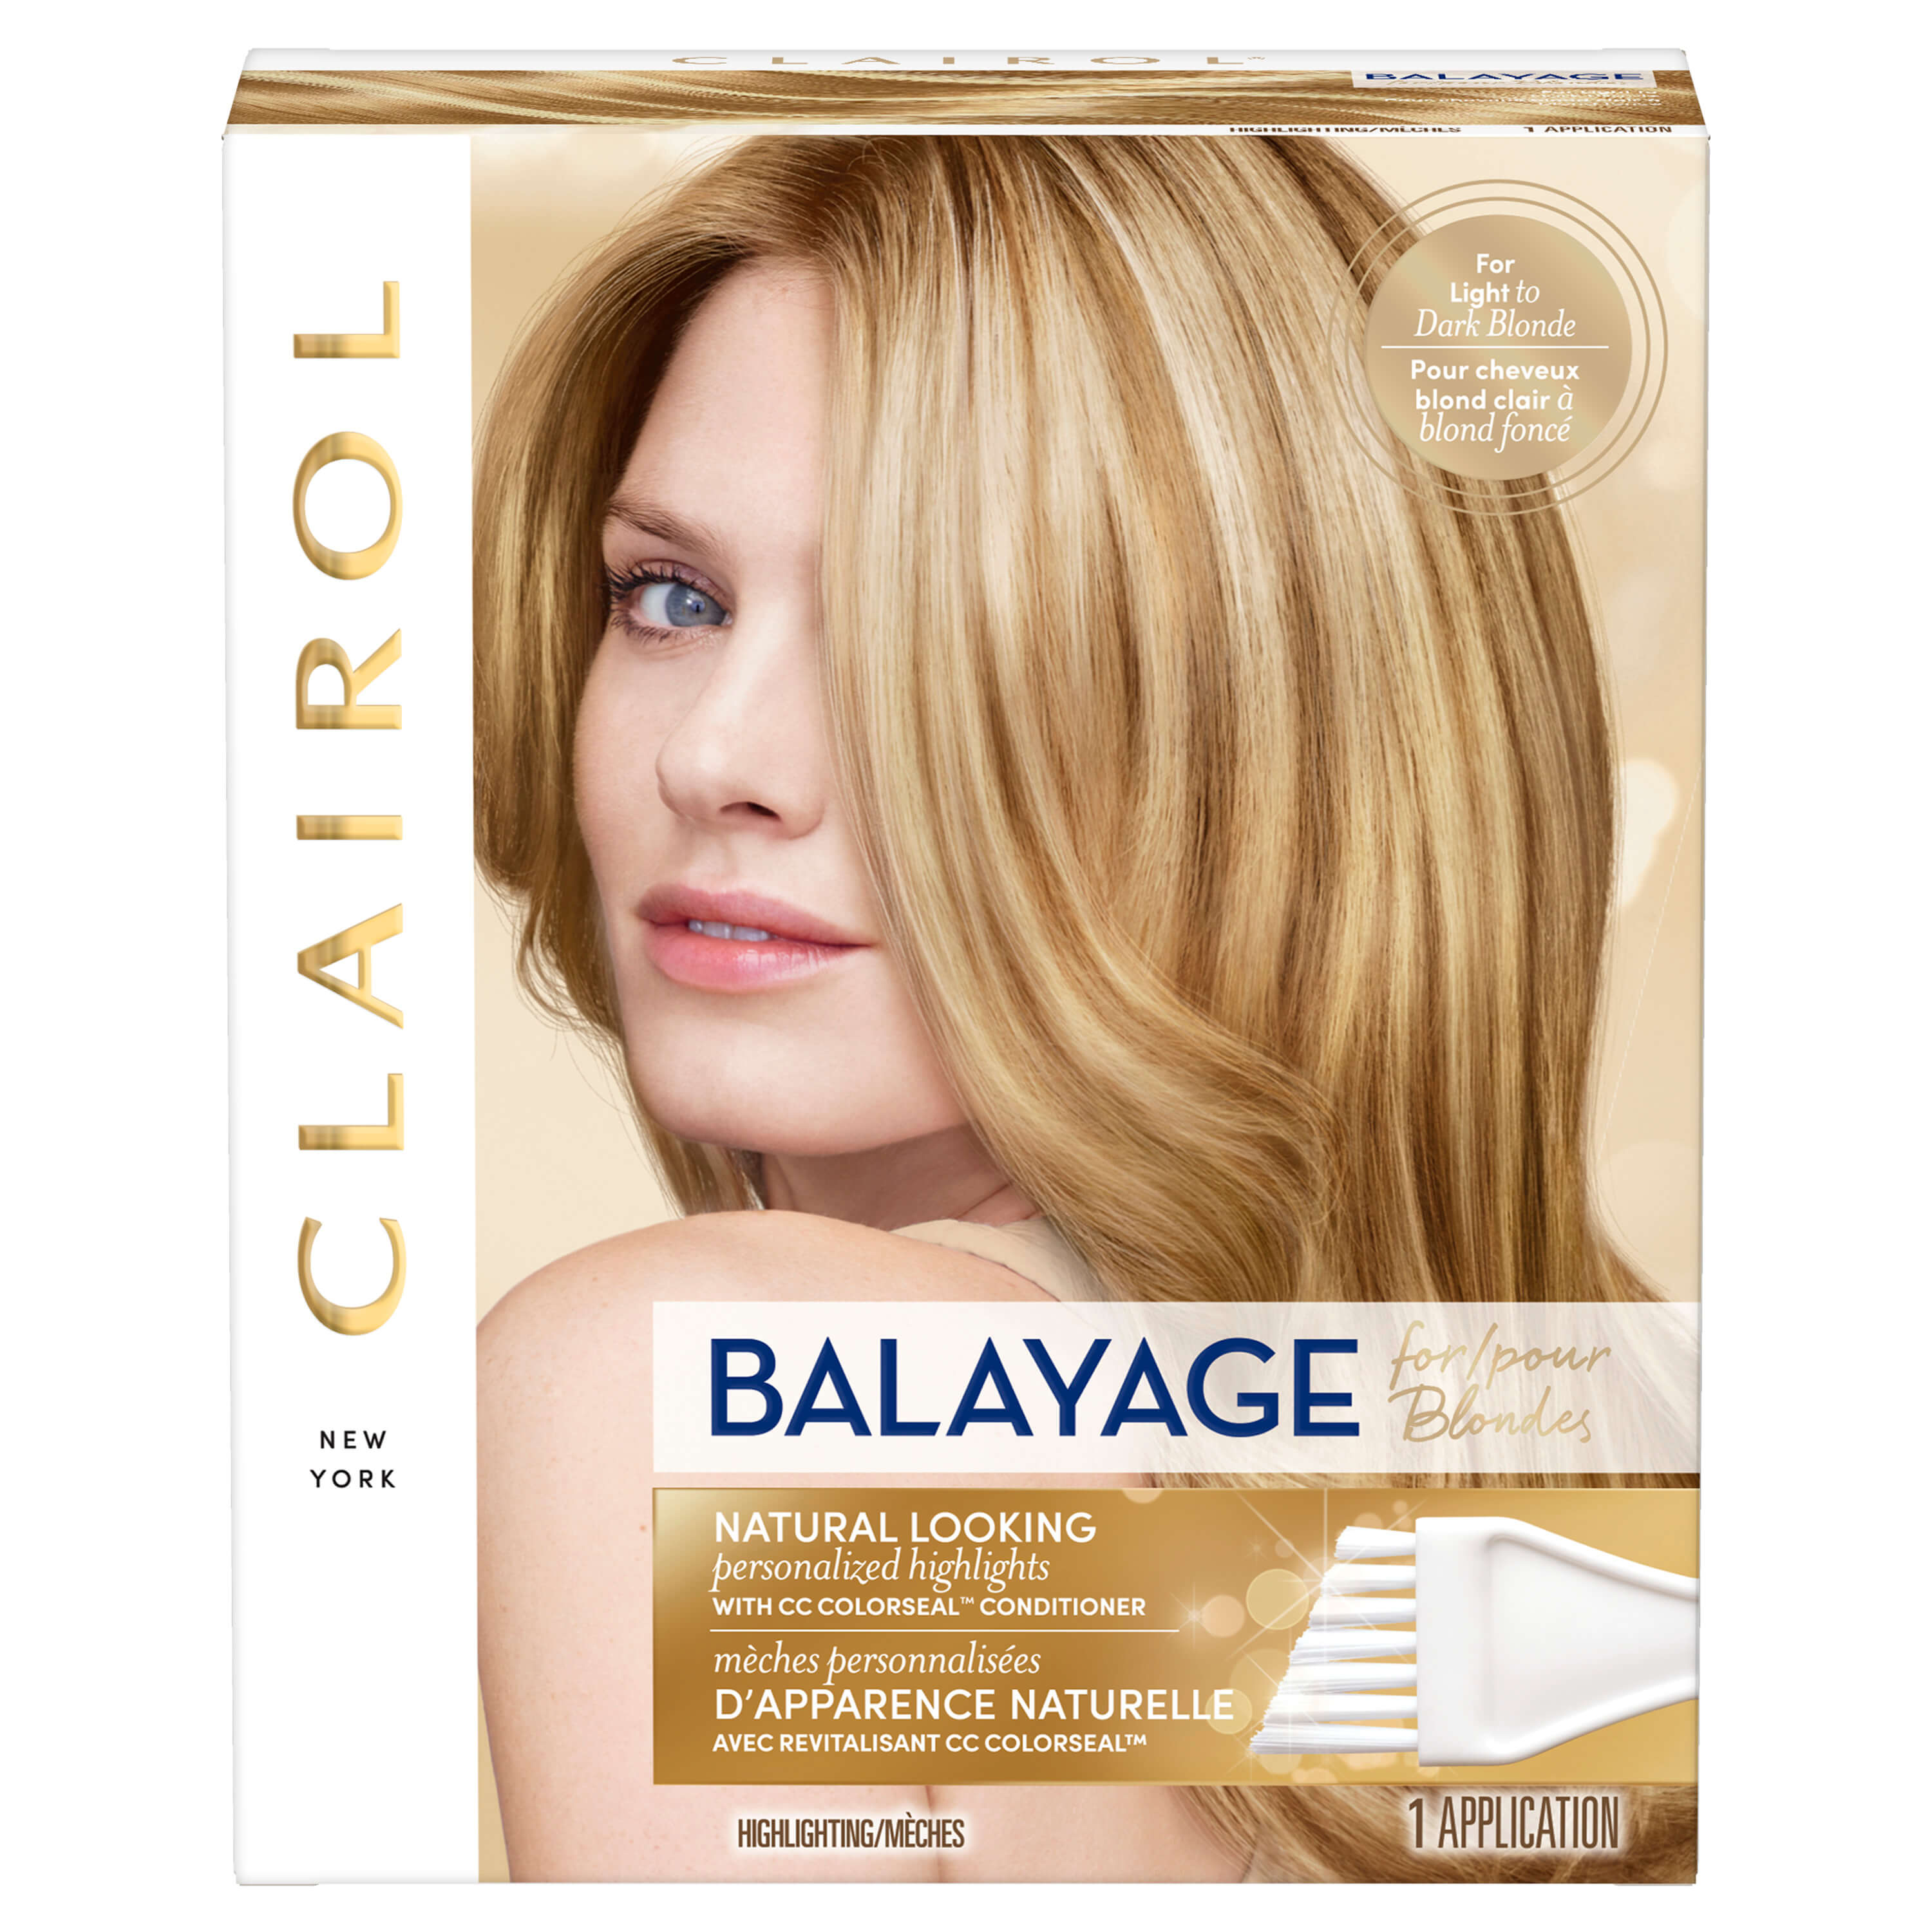 Clairol Nice'n Easy Balayage Permanent Hair Color for Blondes Kit